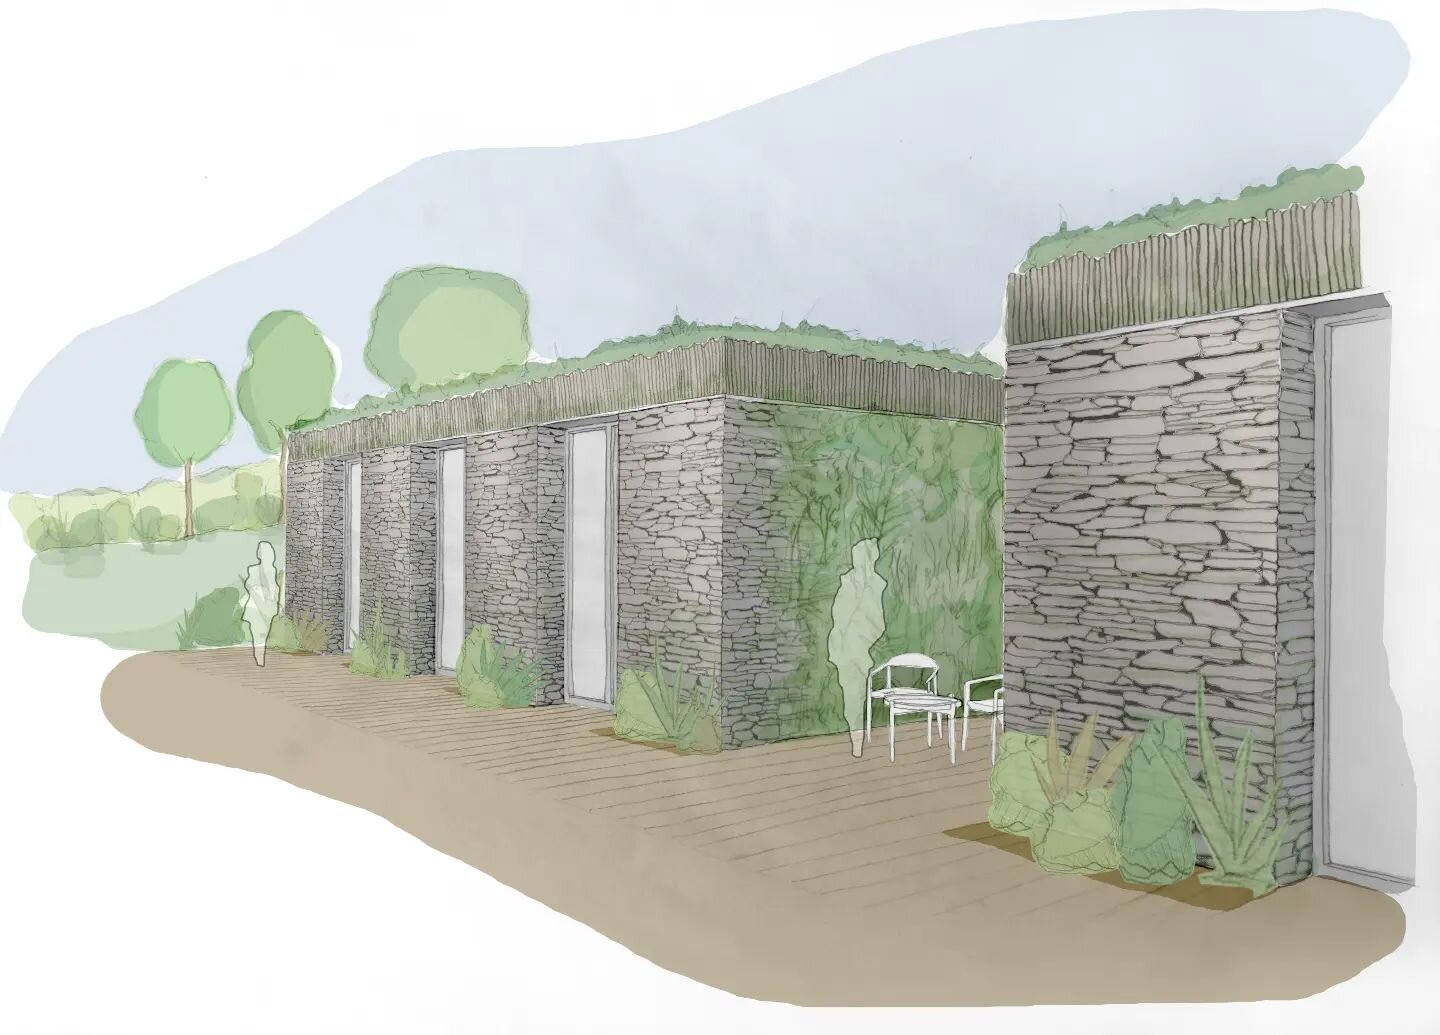 Planning approval for Blackawton Lodge! A new Eco-home semi-submerged into a Devon hillside.

Taking inspiration from local dry stone walling techniques, the lodge aims to recede into the agricultural vernacular of the area. 

Spread out on a single 